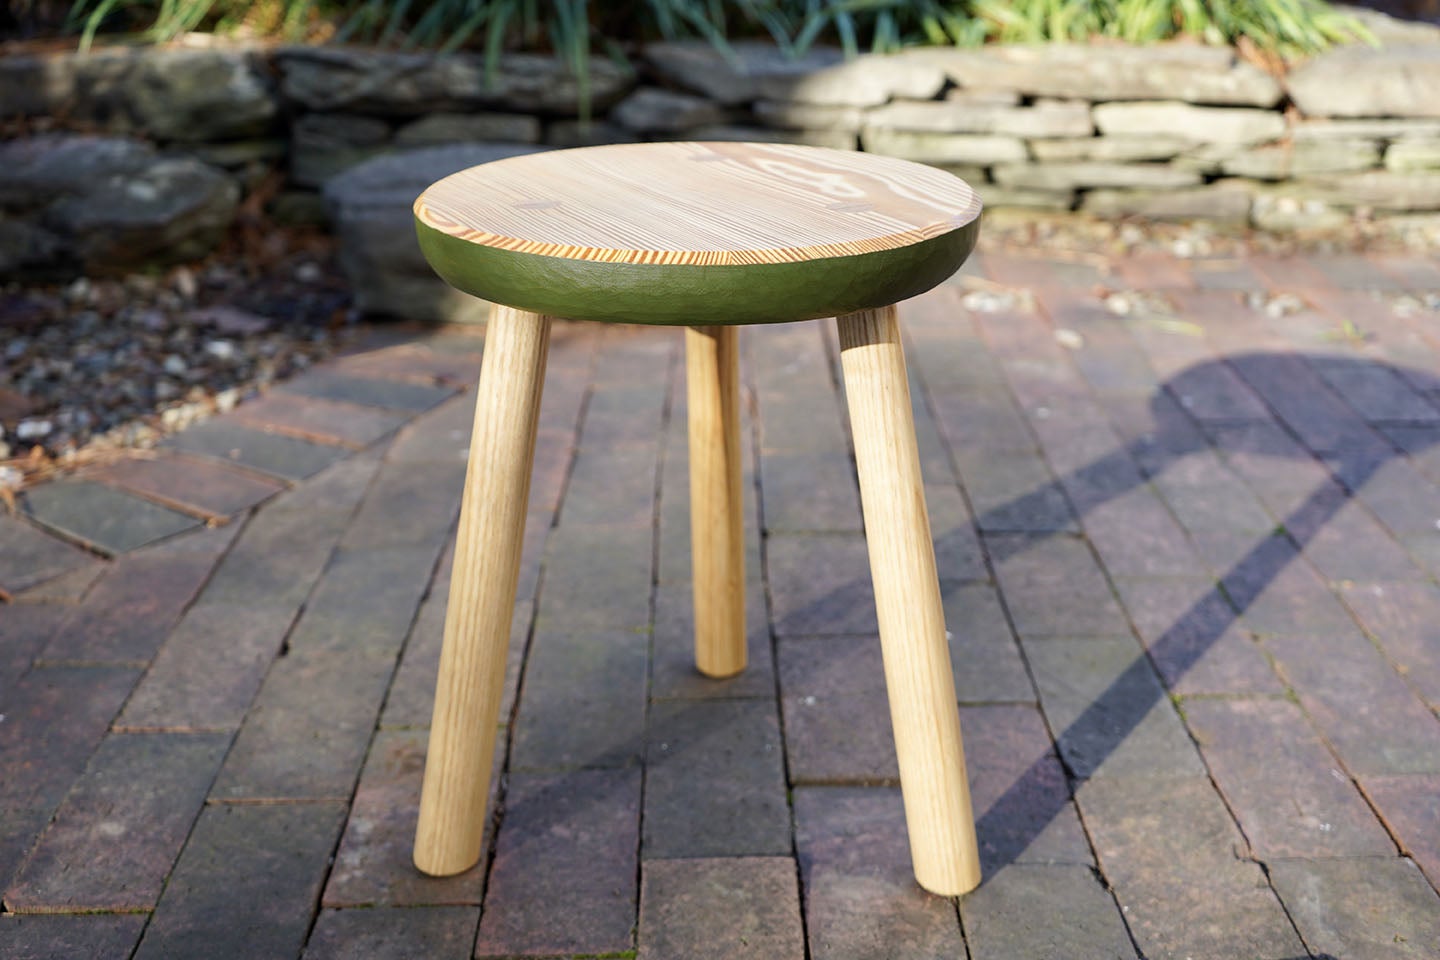 Build The Three Legged Stool You Didn T, What Angle Should Stool Legs Be